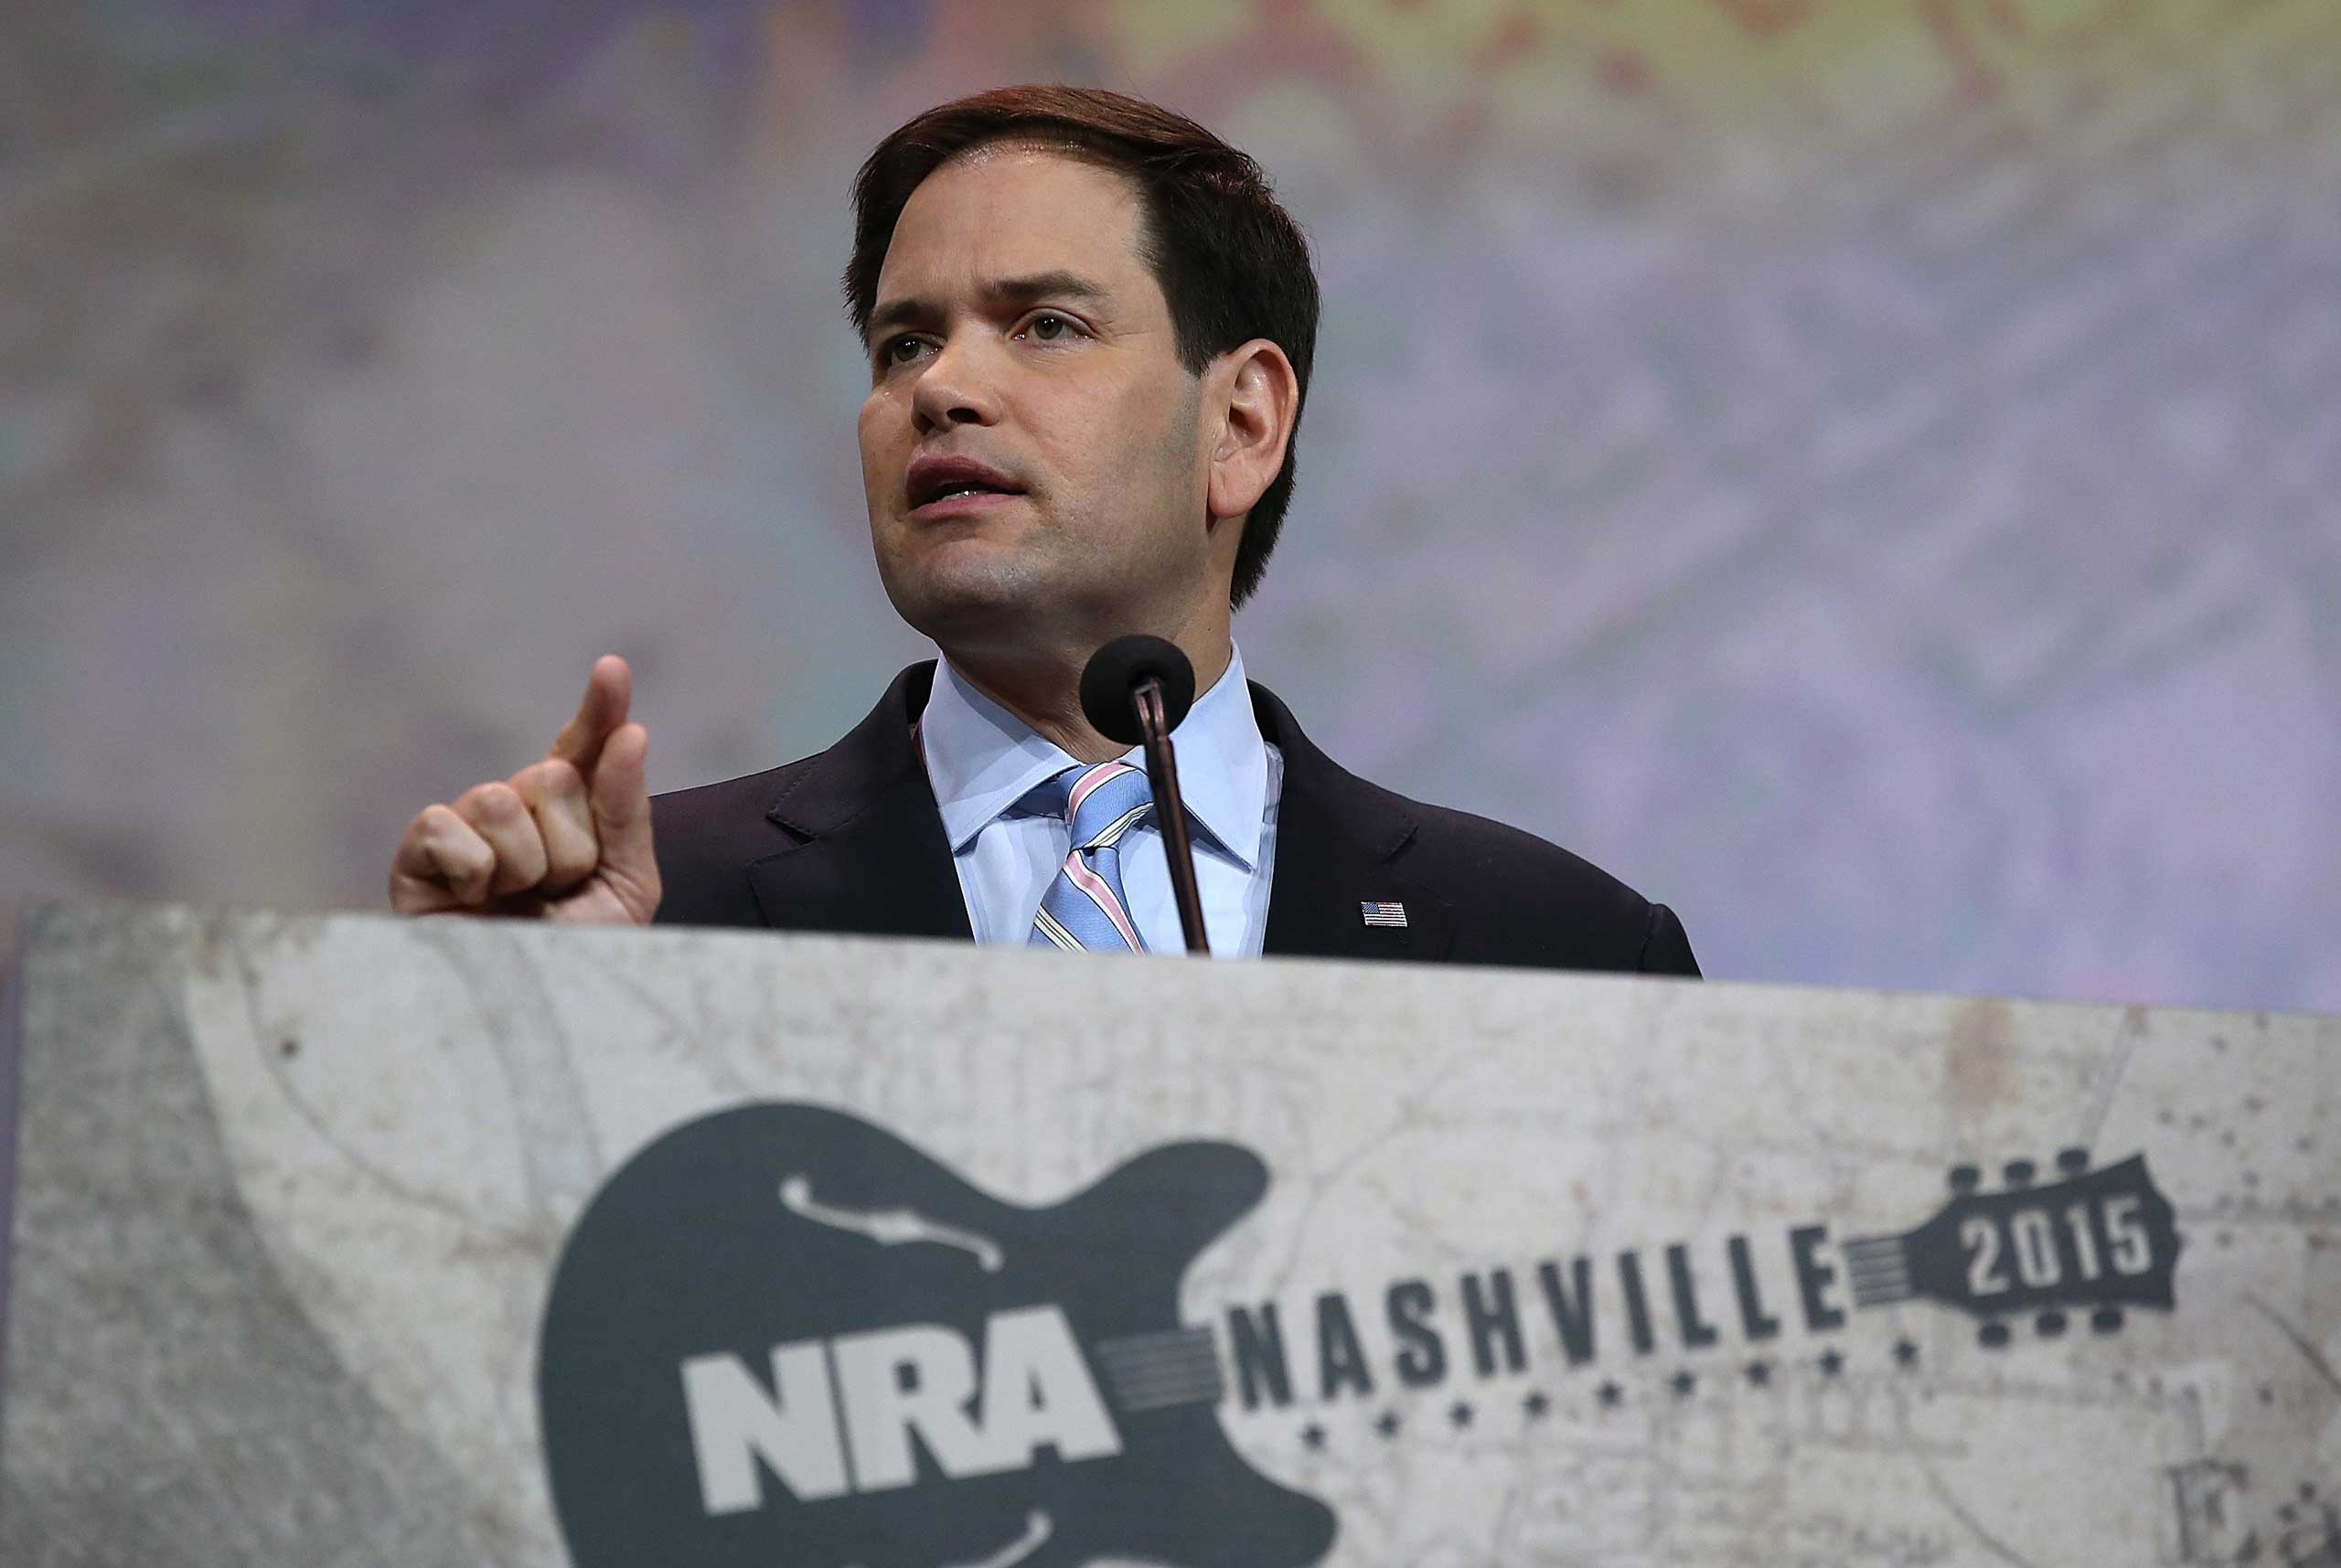 Sen. Marco Rubio speaks during the NRA-ILA Leadership Forum at the 2015 NRA Annual Meeting  in Nashville on Apr. 10, 2015. (Justin Sullivan—Getty Images)